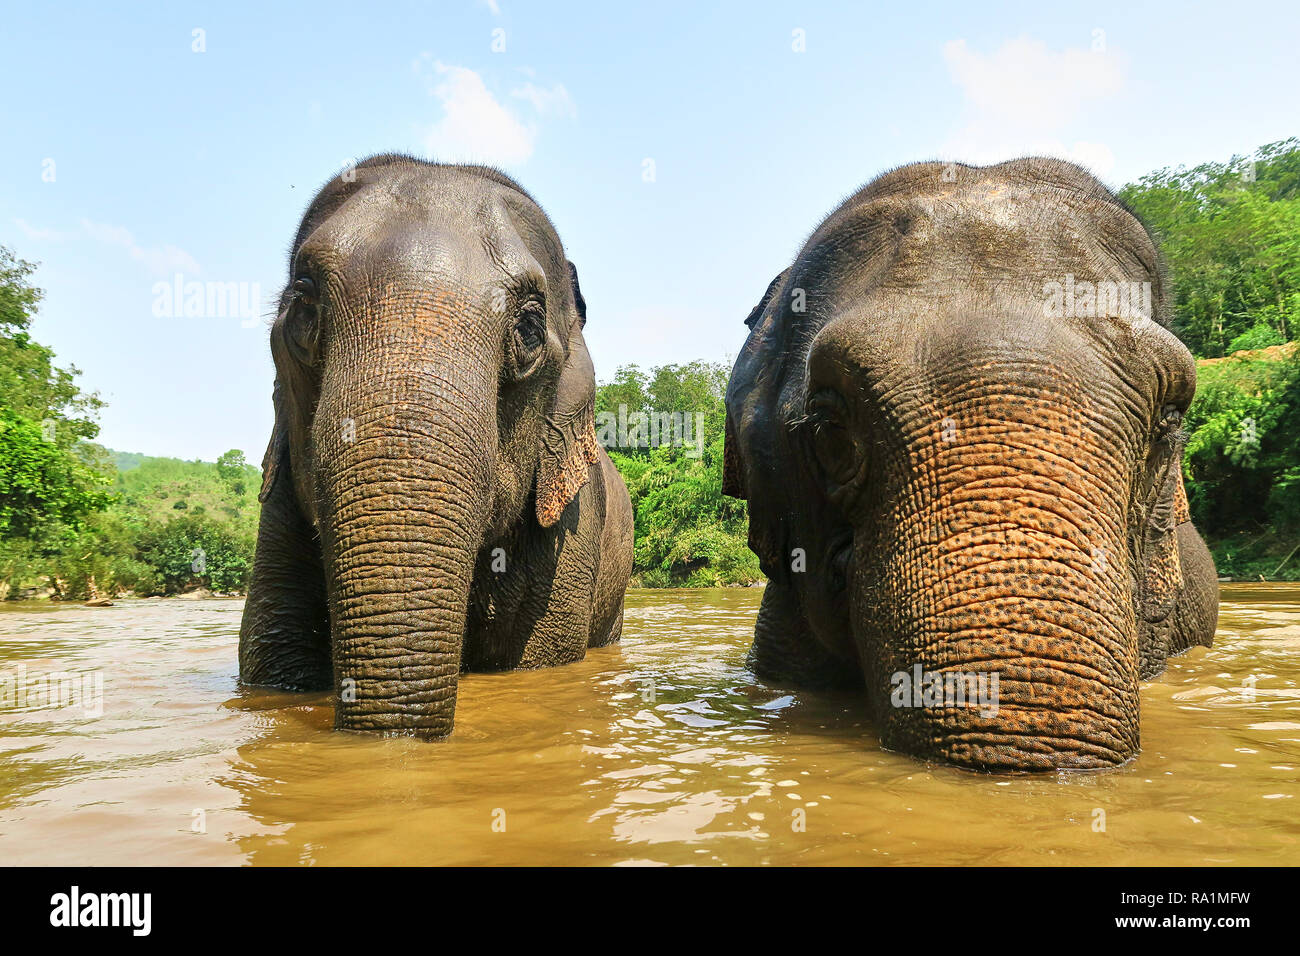 Couple of Asian Elephants in a river taking a bath Stock Photo